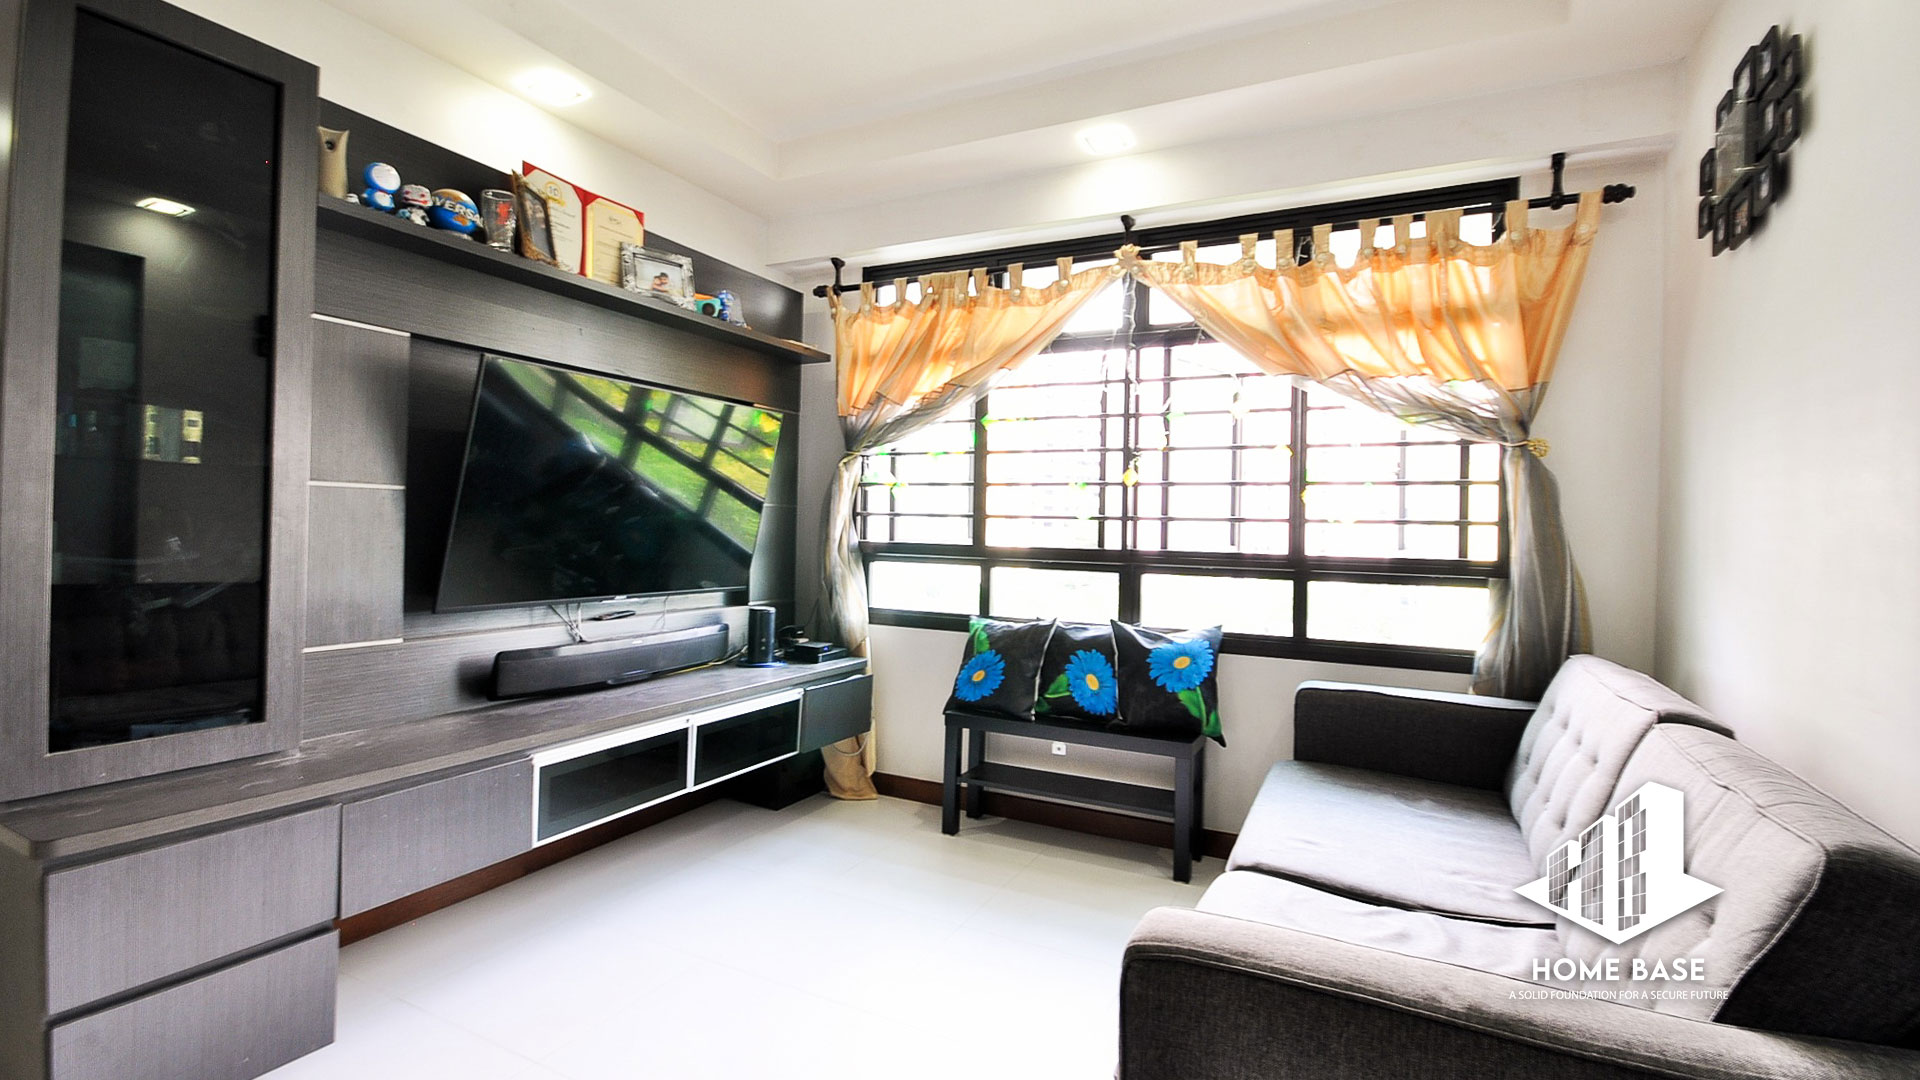 Living Room 180C Boon Lay Dr Img 1